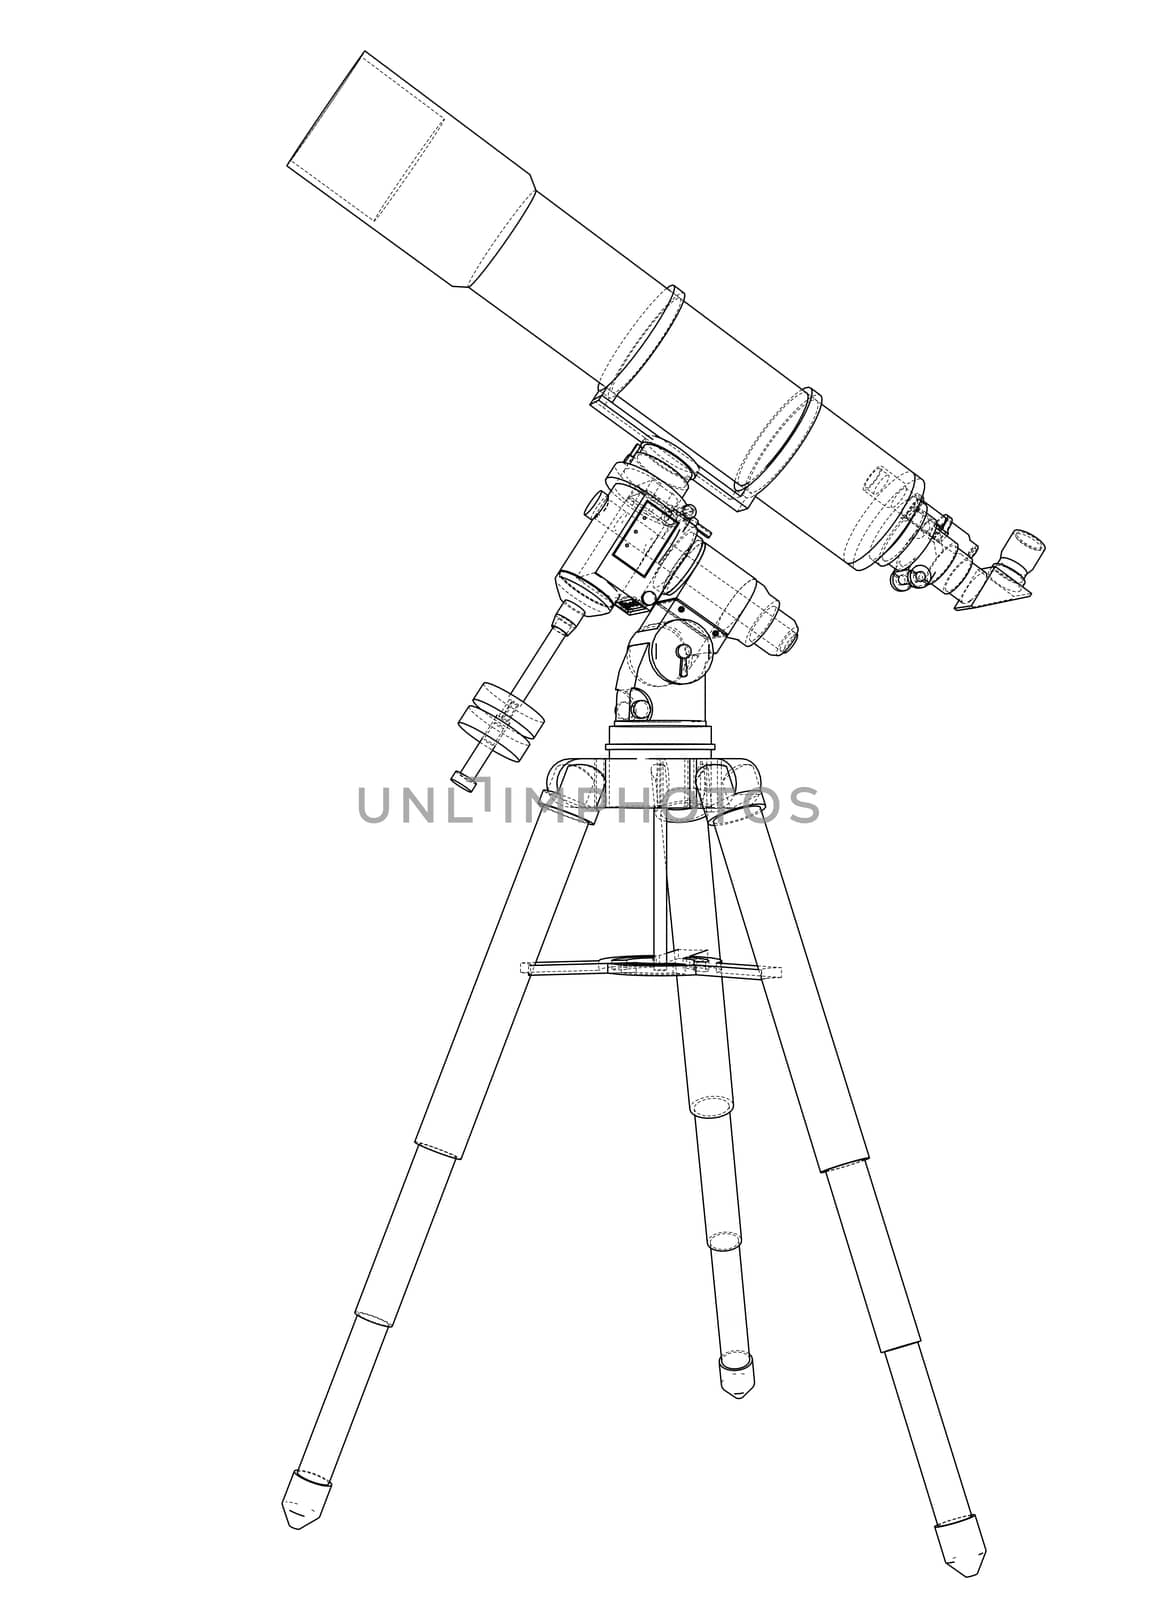 Telescope concept outline. 3d illustration. Wire-frame style